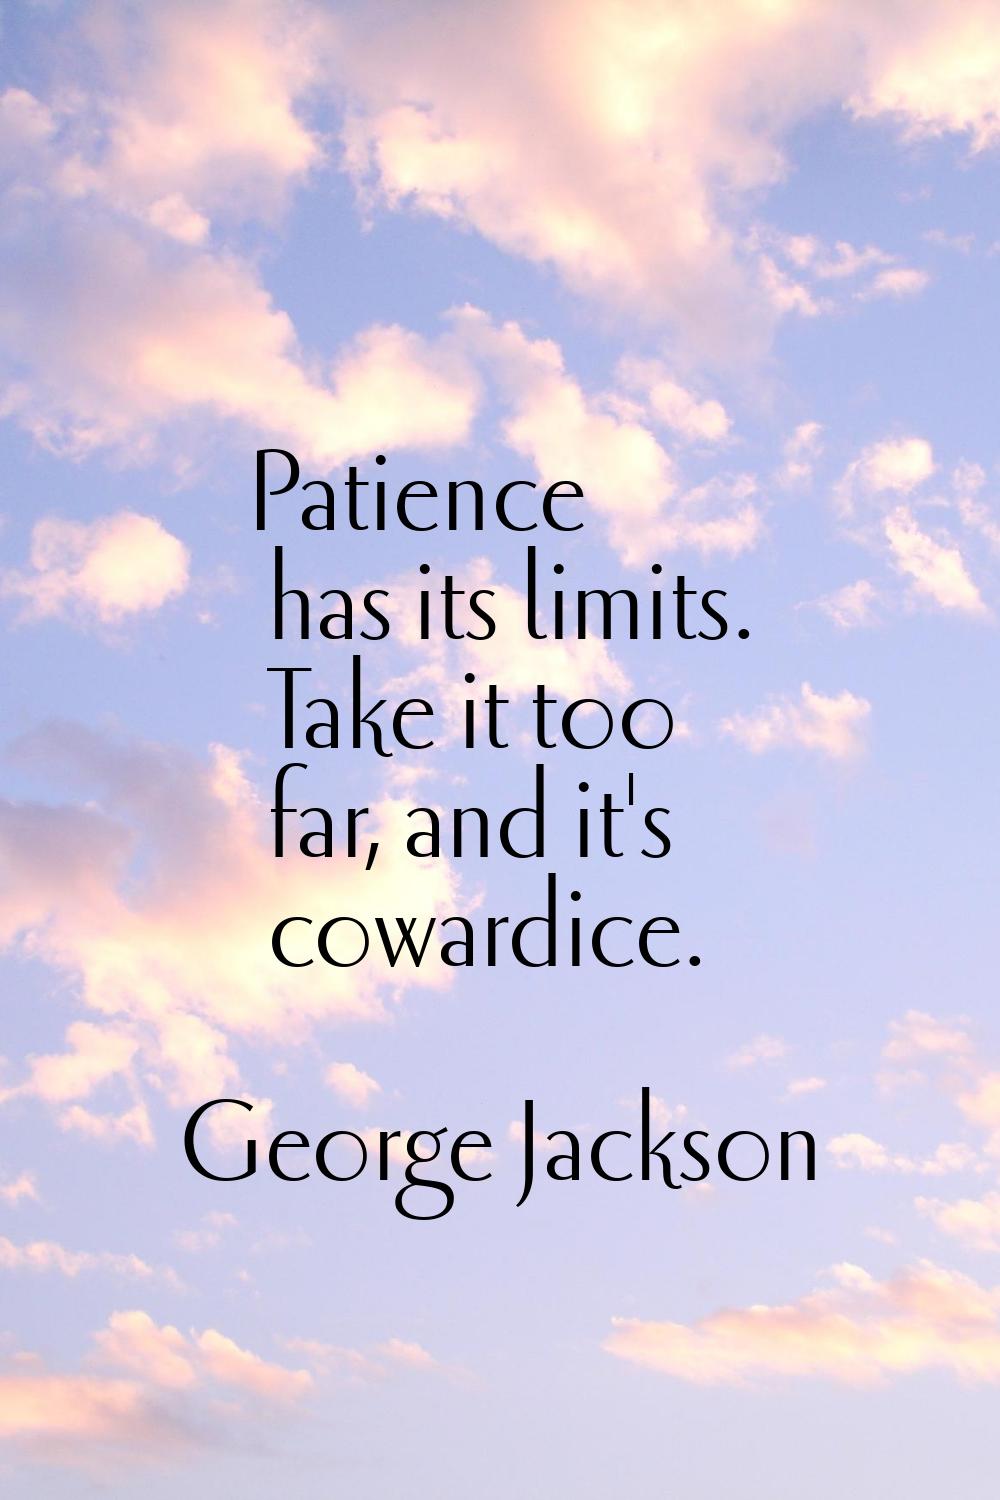 Patience has its limits. Take it too far, and it's cowardice.